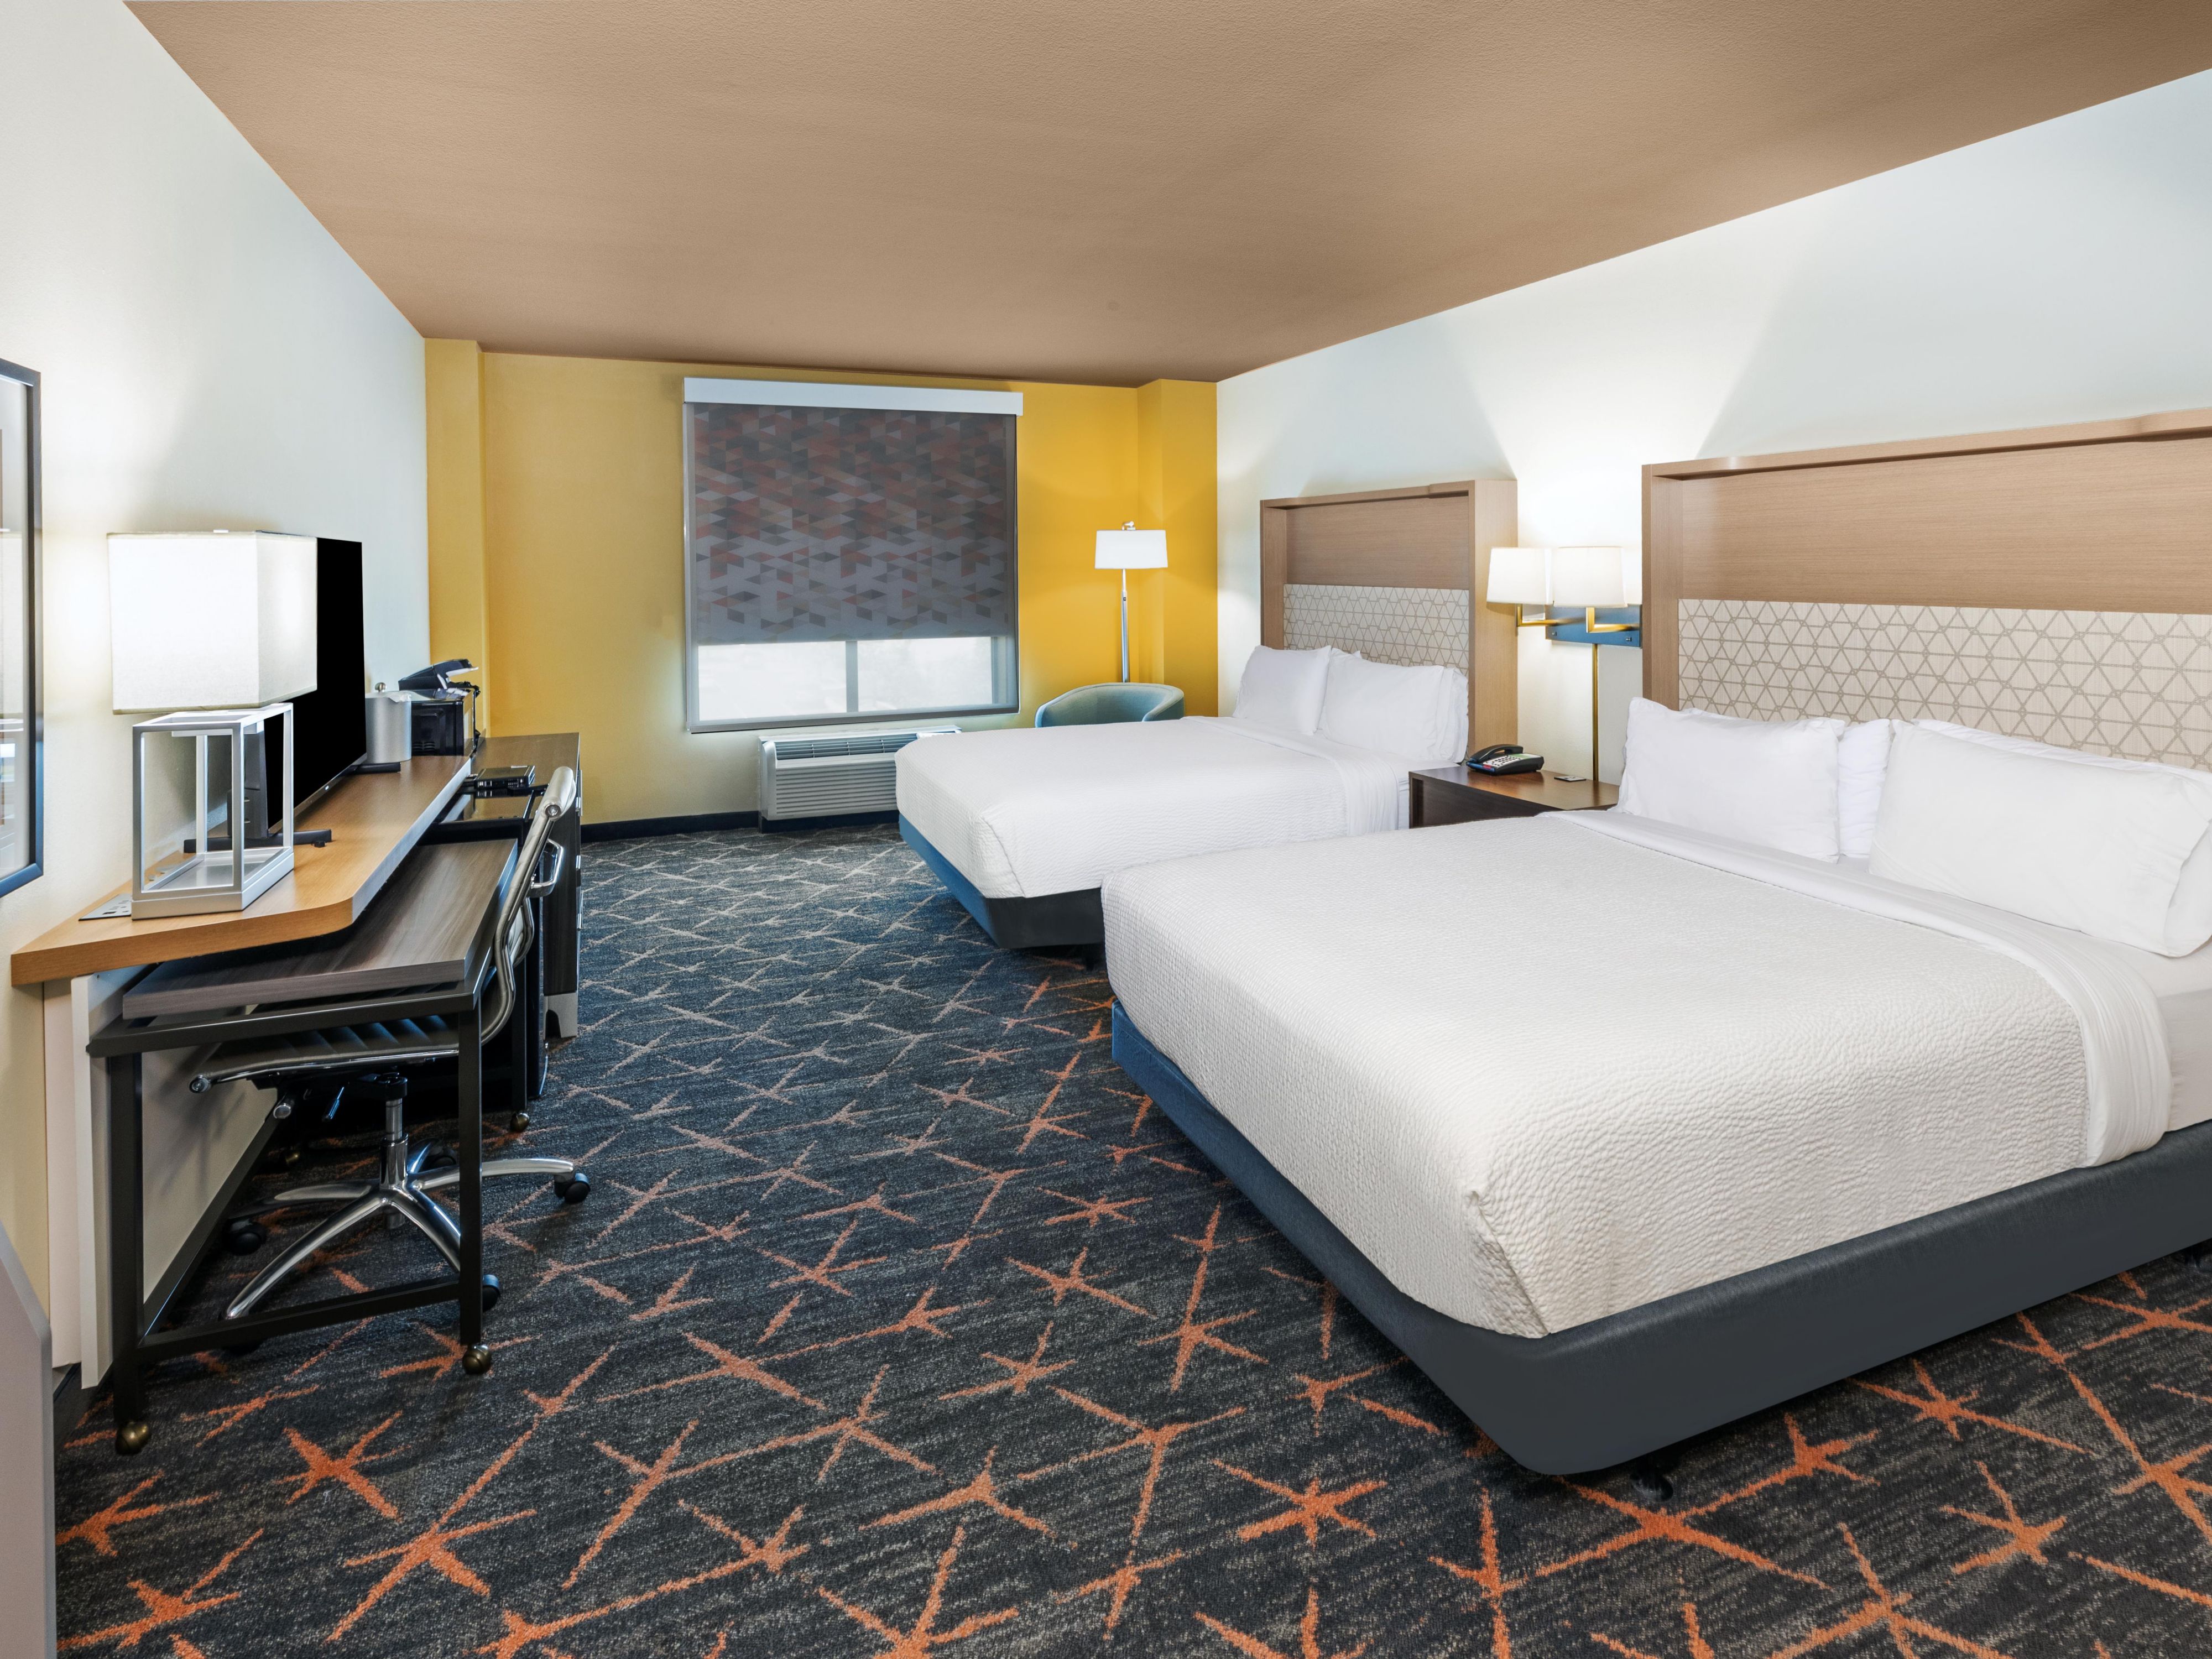 Newly Renovated! Come explore our revamped rooms, restaurant and fitness center. Pictures are on their way. We can't wait to share the "after" photo with you. 